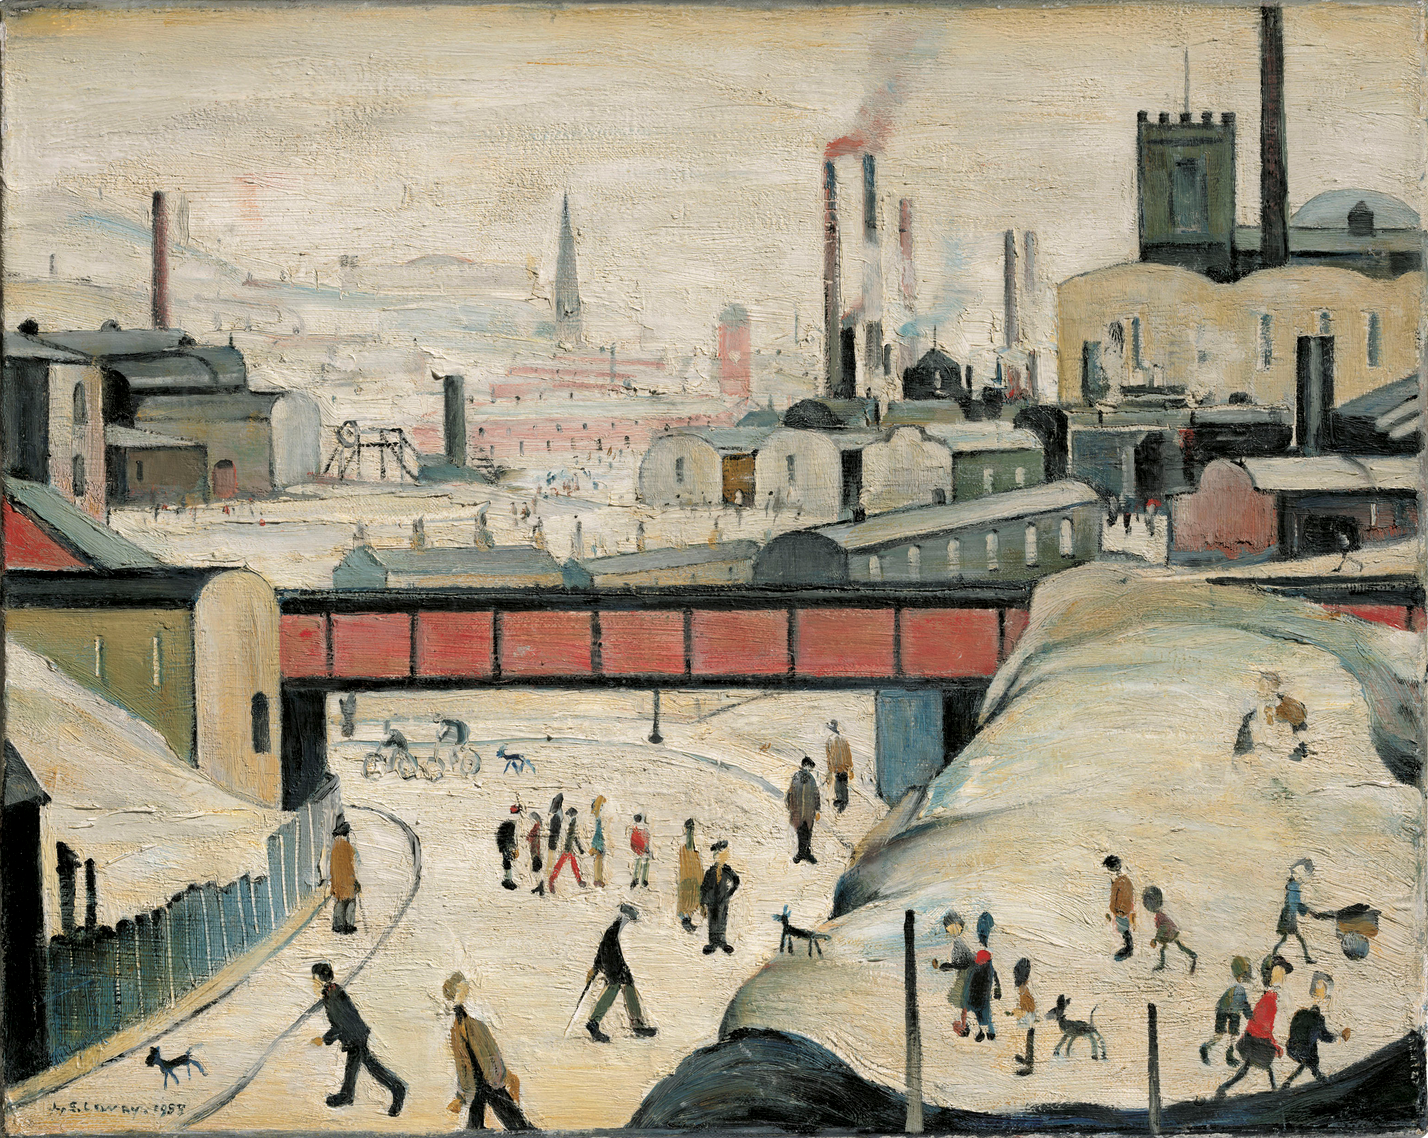 The Red Bridge (1958) by Laurence Stephen Lowry (1887 - 1976), English artist.